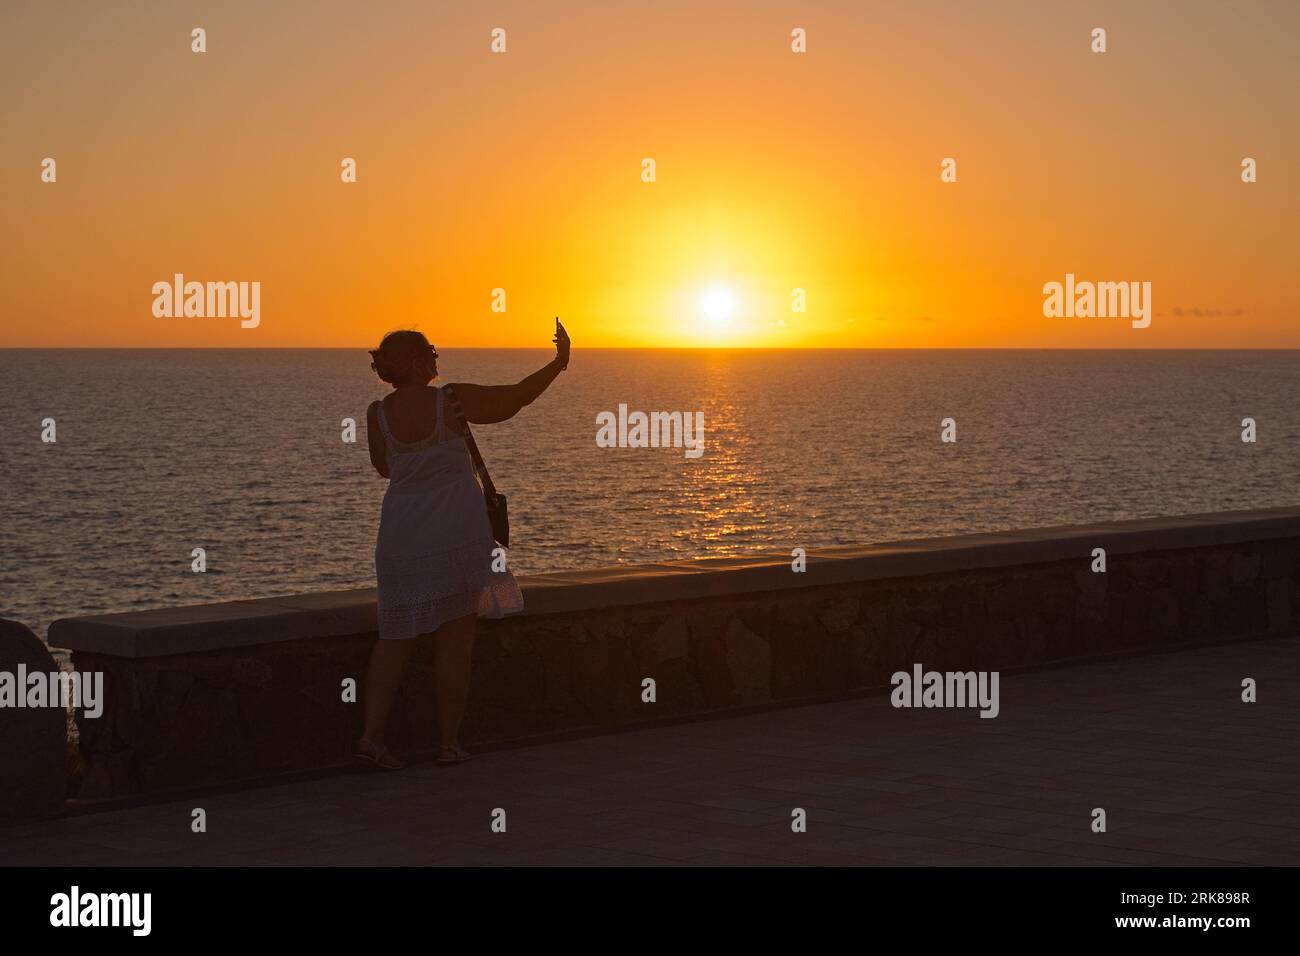 Silhouette of a woman taken herself a selfie against sun during sunset in Maspalomas, Gran Canaria, Spain Stock Photo